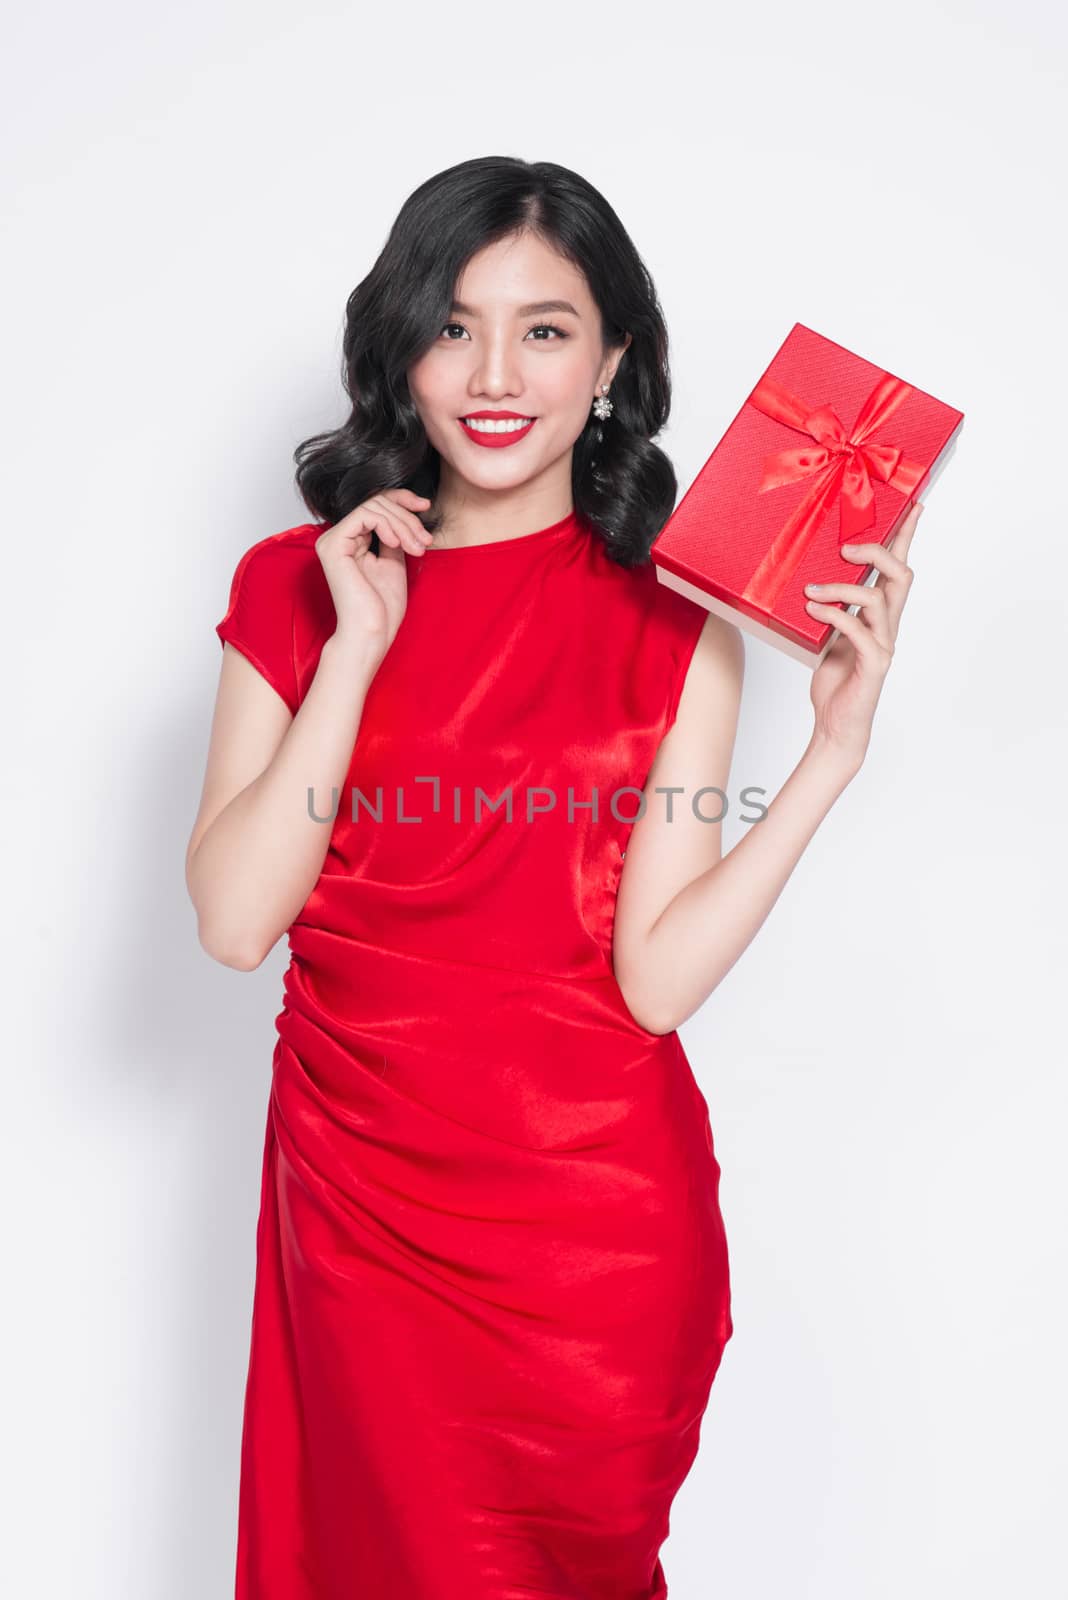 Pretty young asian woman dressed in red dress with a present